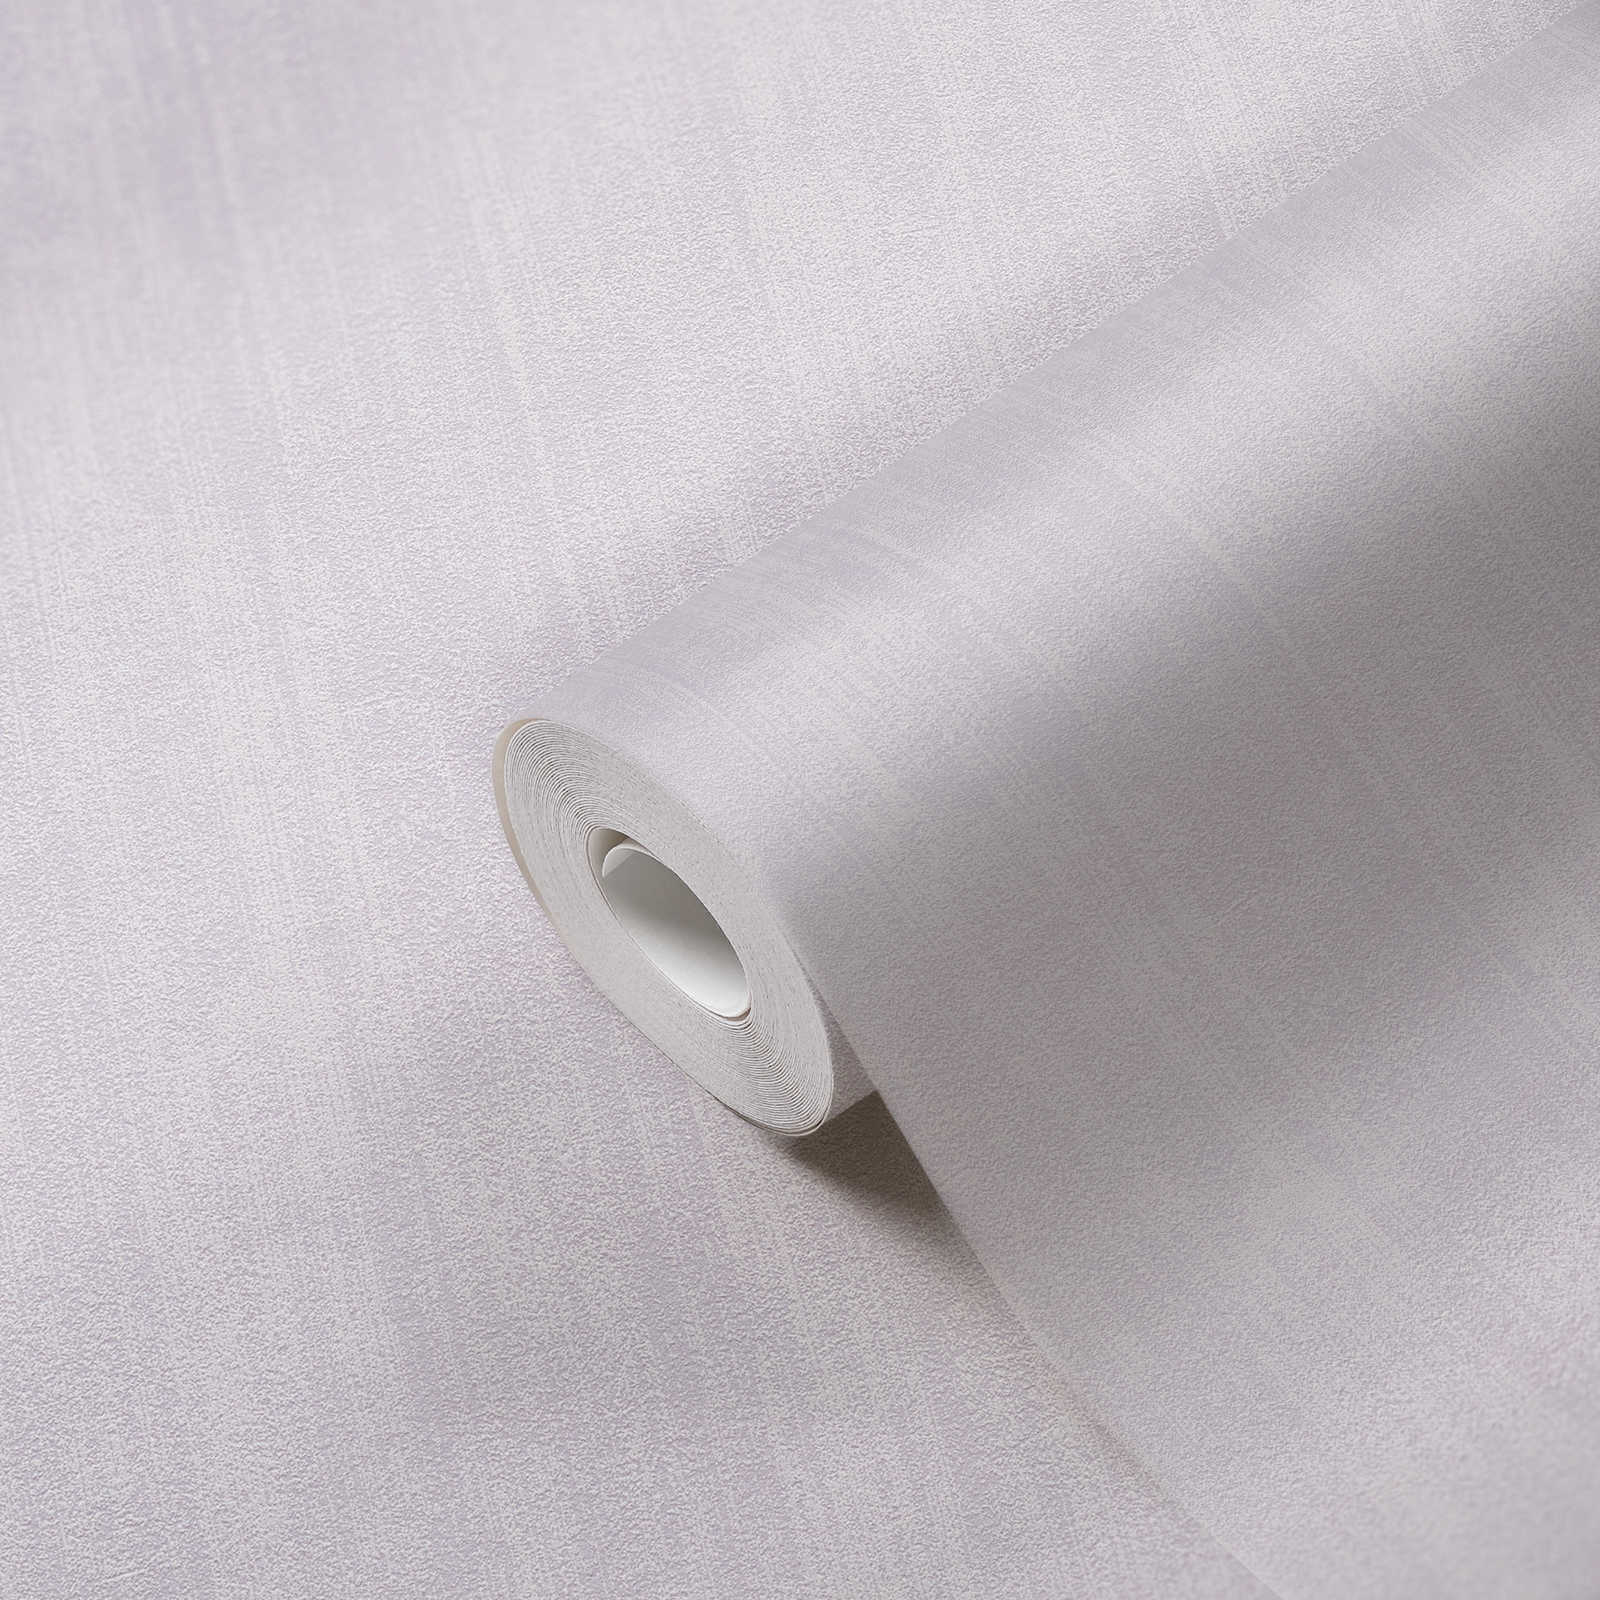             Plain non-woven wallpaper with tone-on-tone hatching - cream
        